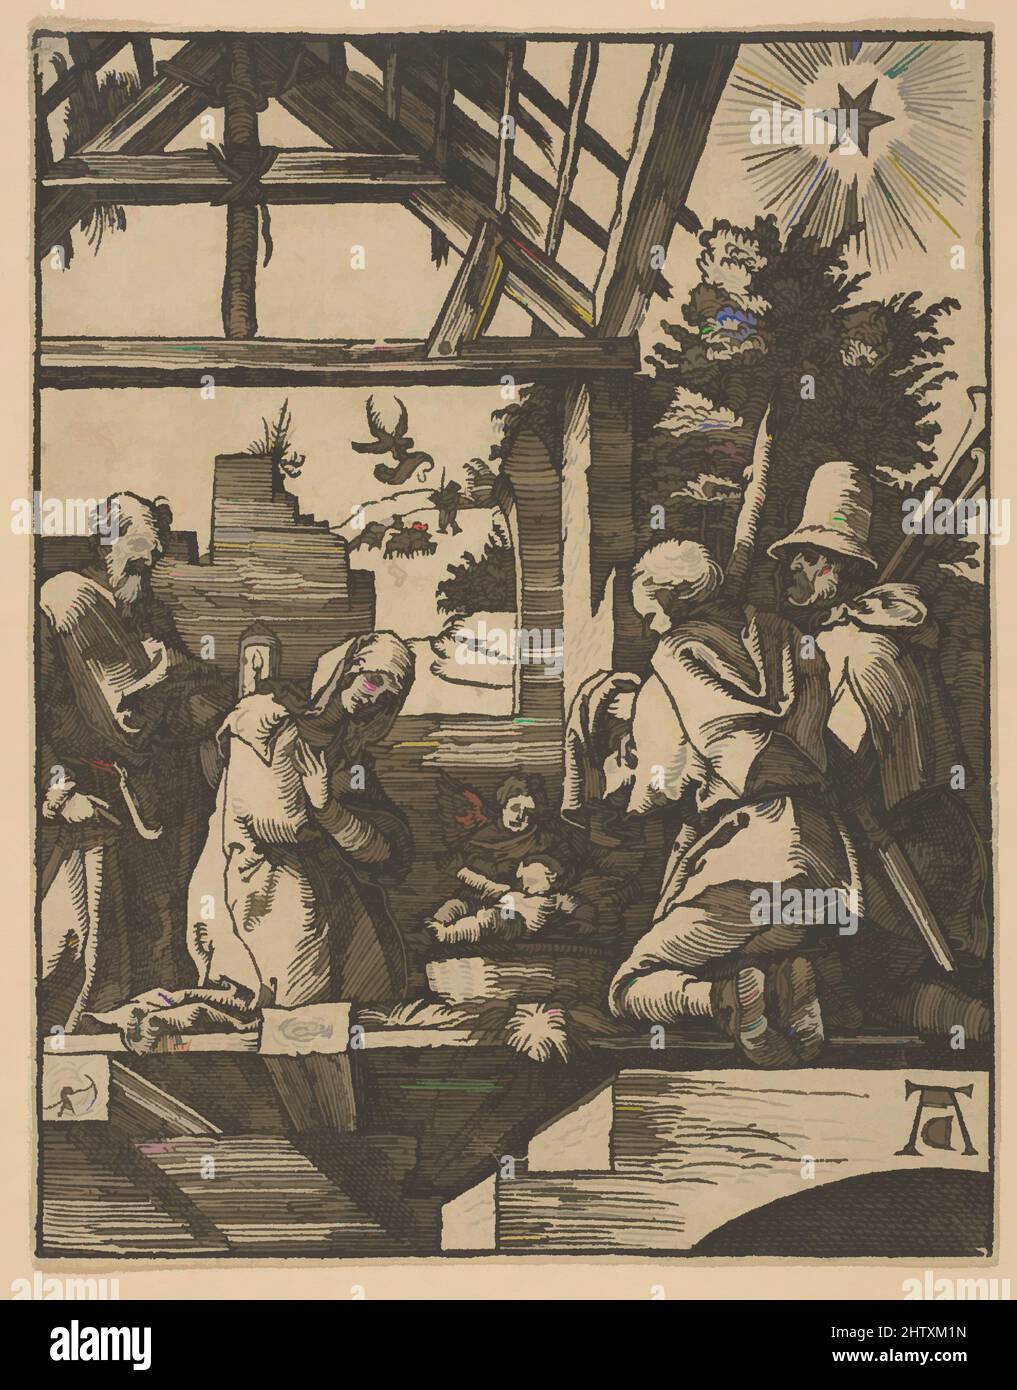 Art inspired by The Nativity (copy), n.d., Woodcut, Prints, After Albrecht Dürer (German, Nuremberg 1471–1528 Nuremberg), Johannes Mommaert, Classic works modernized by Artotop with a splash of modernity. Shapes, color and value, eye-catching visual impact on art. Emotions through freedom of artworks in a contemporary way. A timeless message pursuing a wildly creative new direction. Artists turning to the digital medium and creating the Artotop NFT Stock Photo